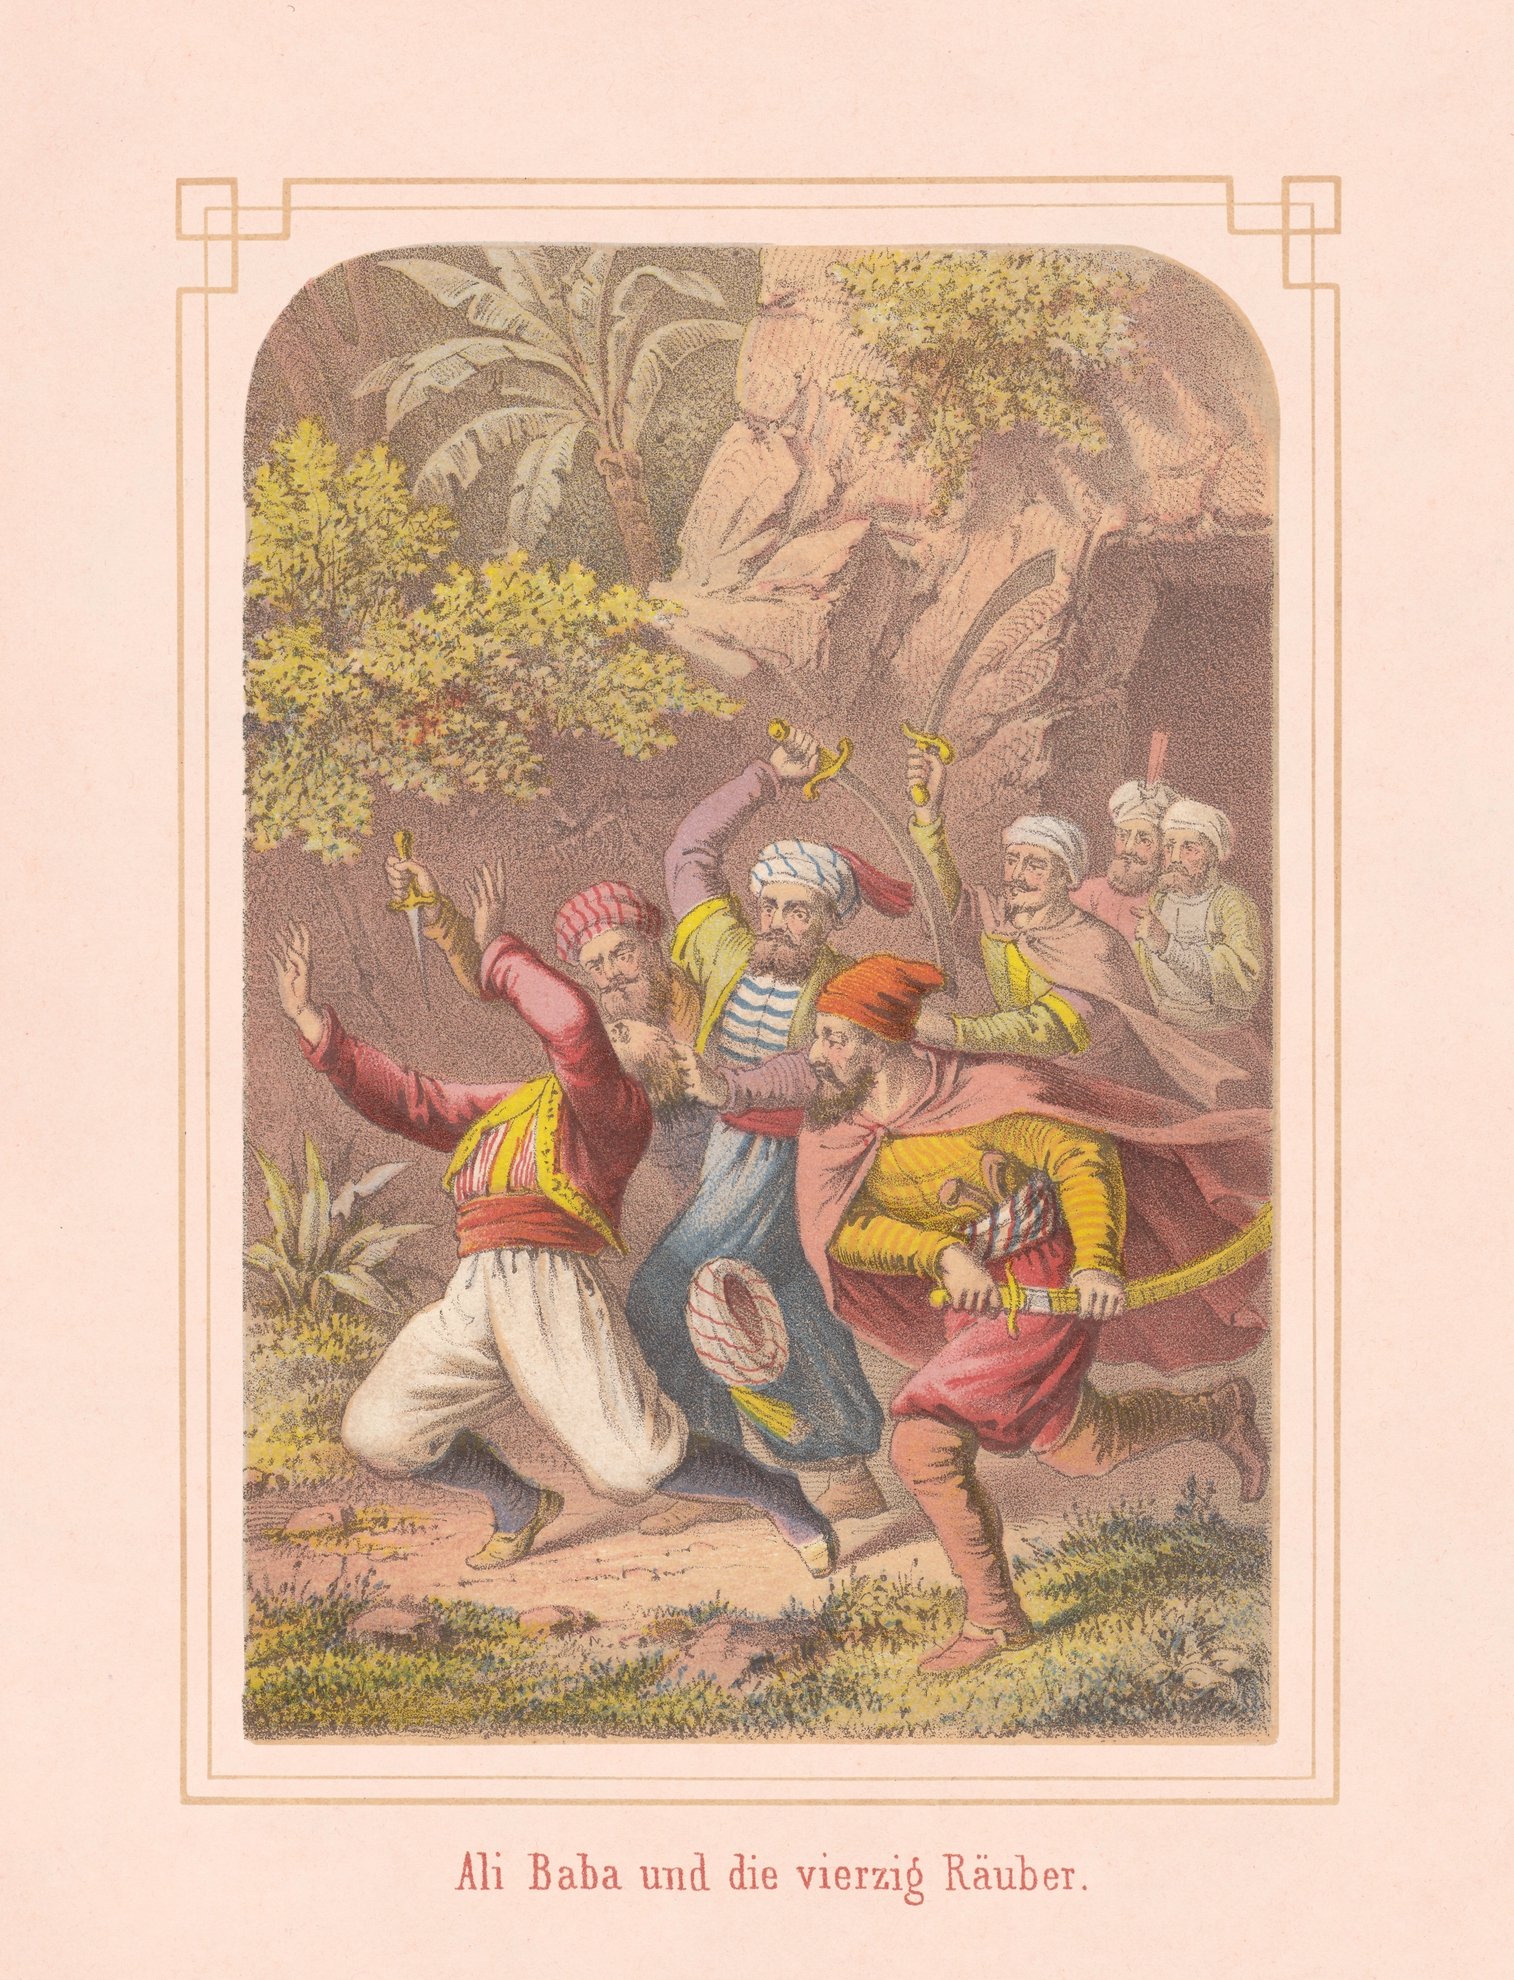 Lithograph shows a scene from 'Ali Baba and the Forty Thieves', a fairy tale from 'One Thousand and One Nights'. (iStock Photo)